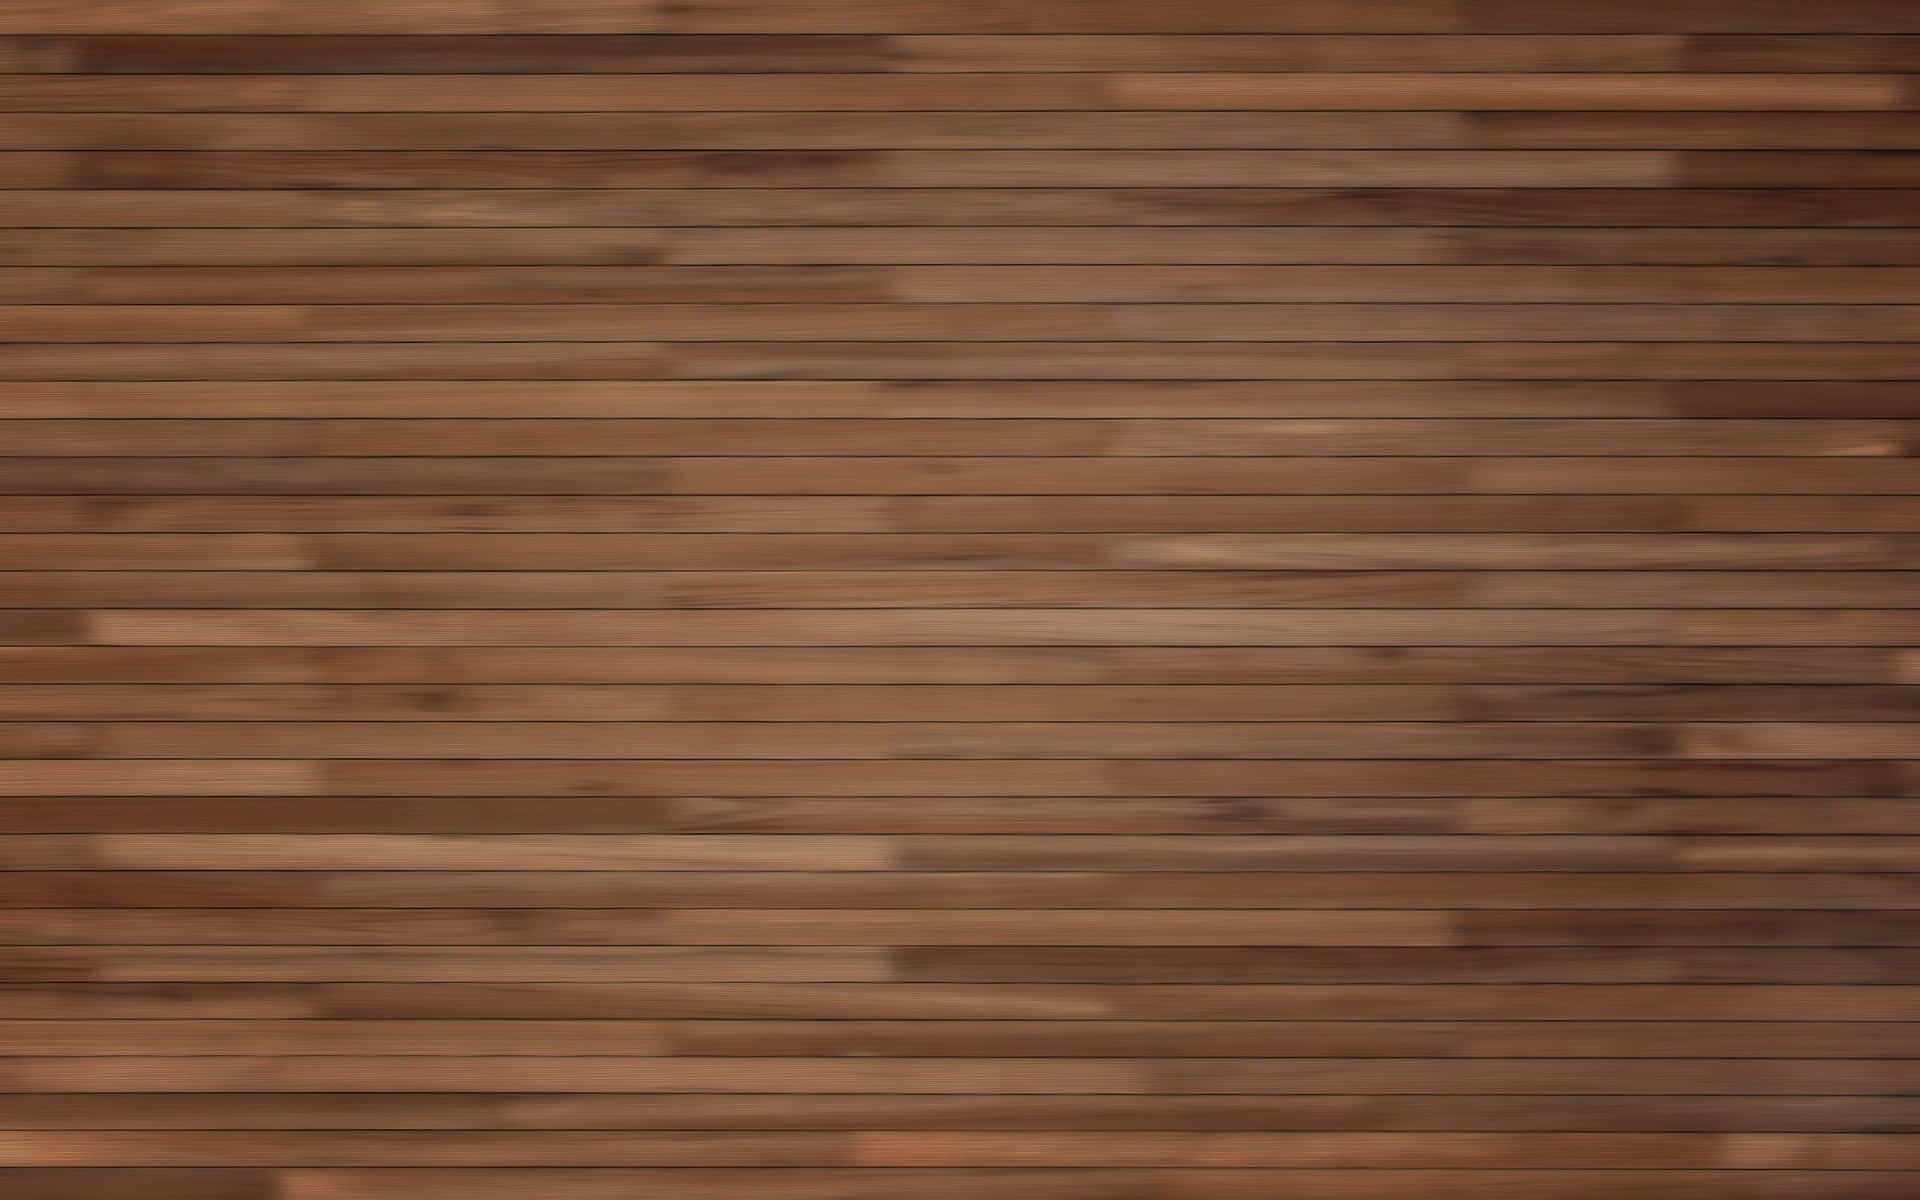 A Rustic Wooden Flooring In An Electric Country Style